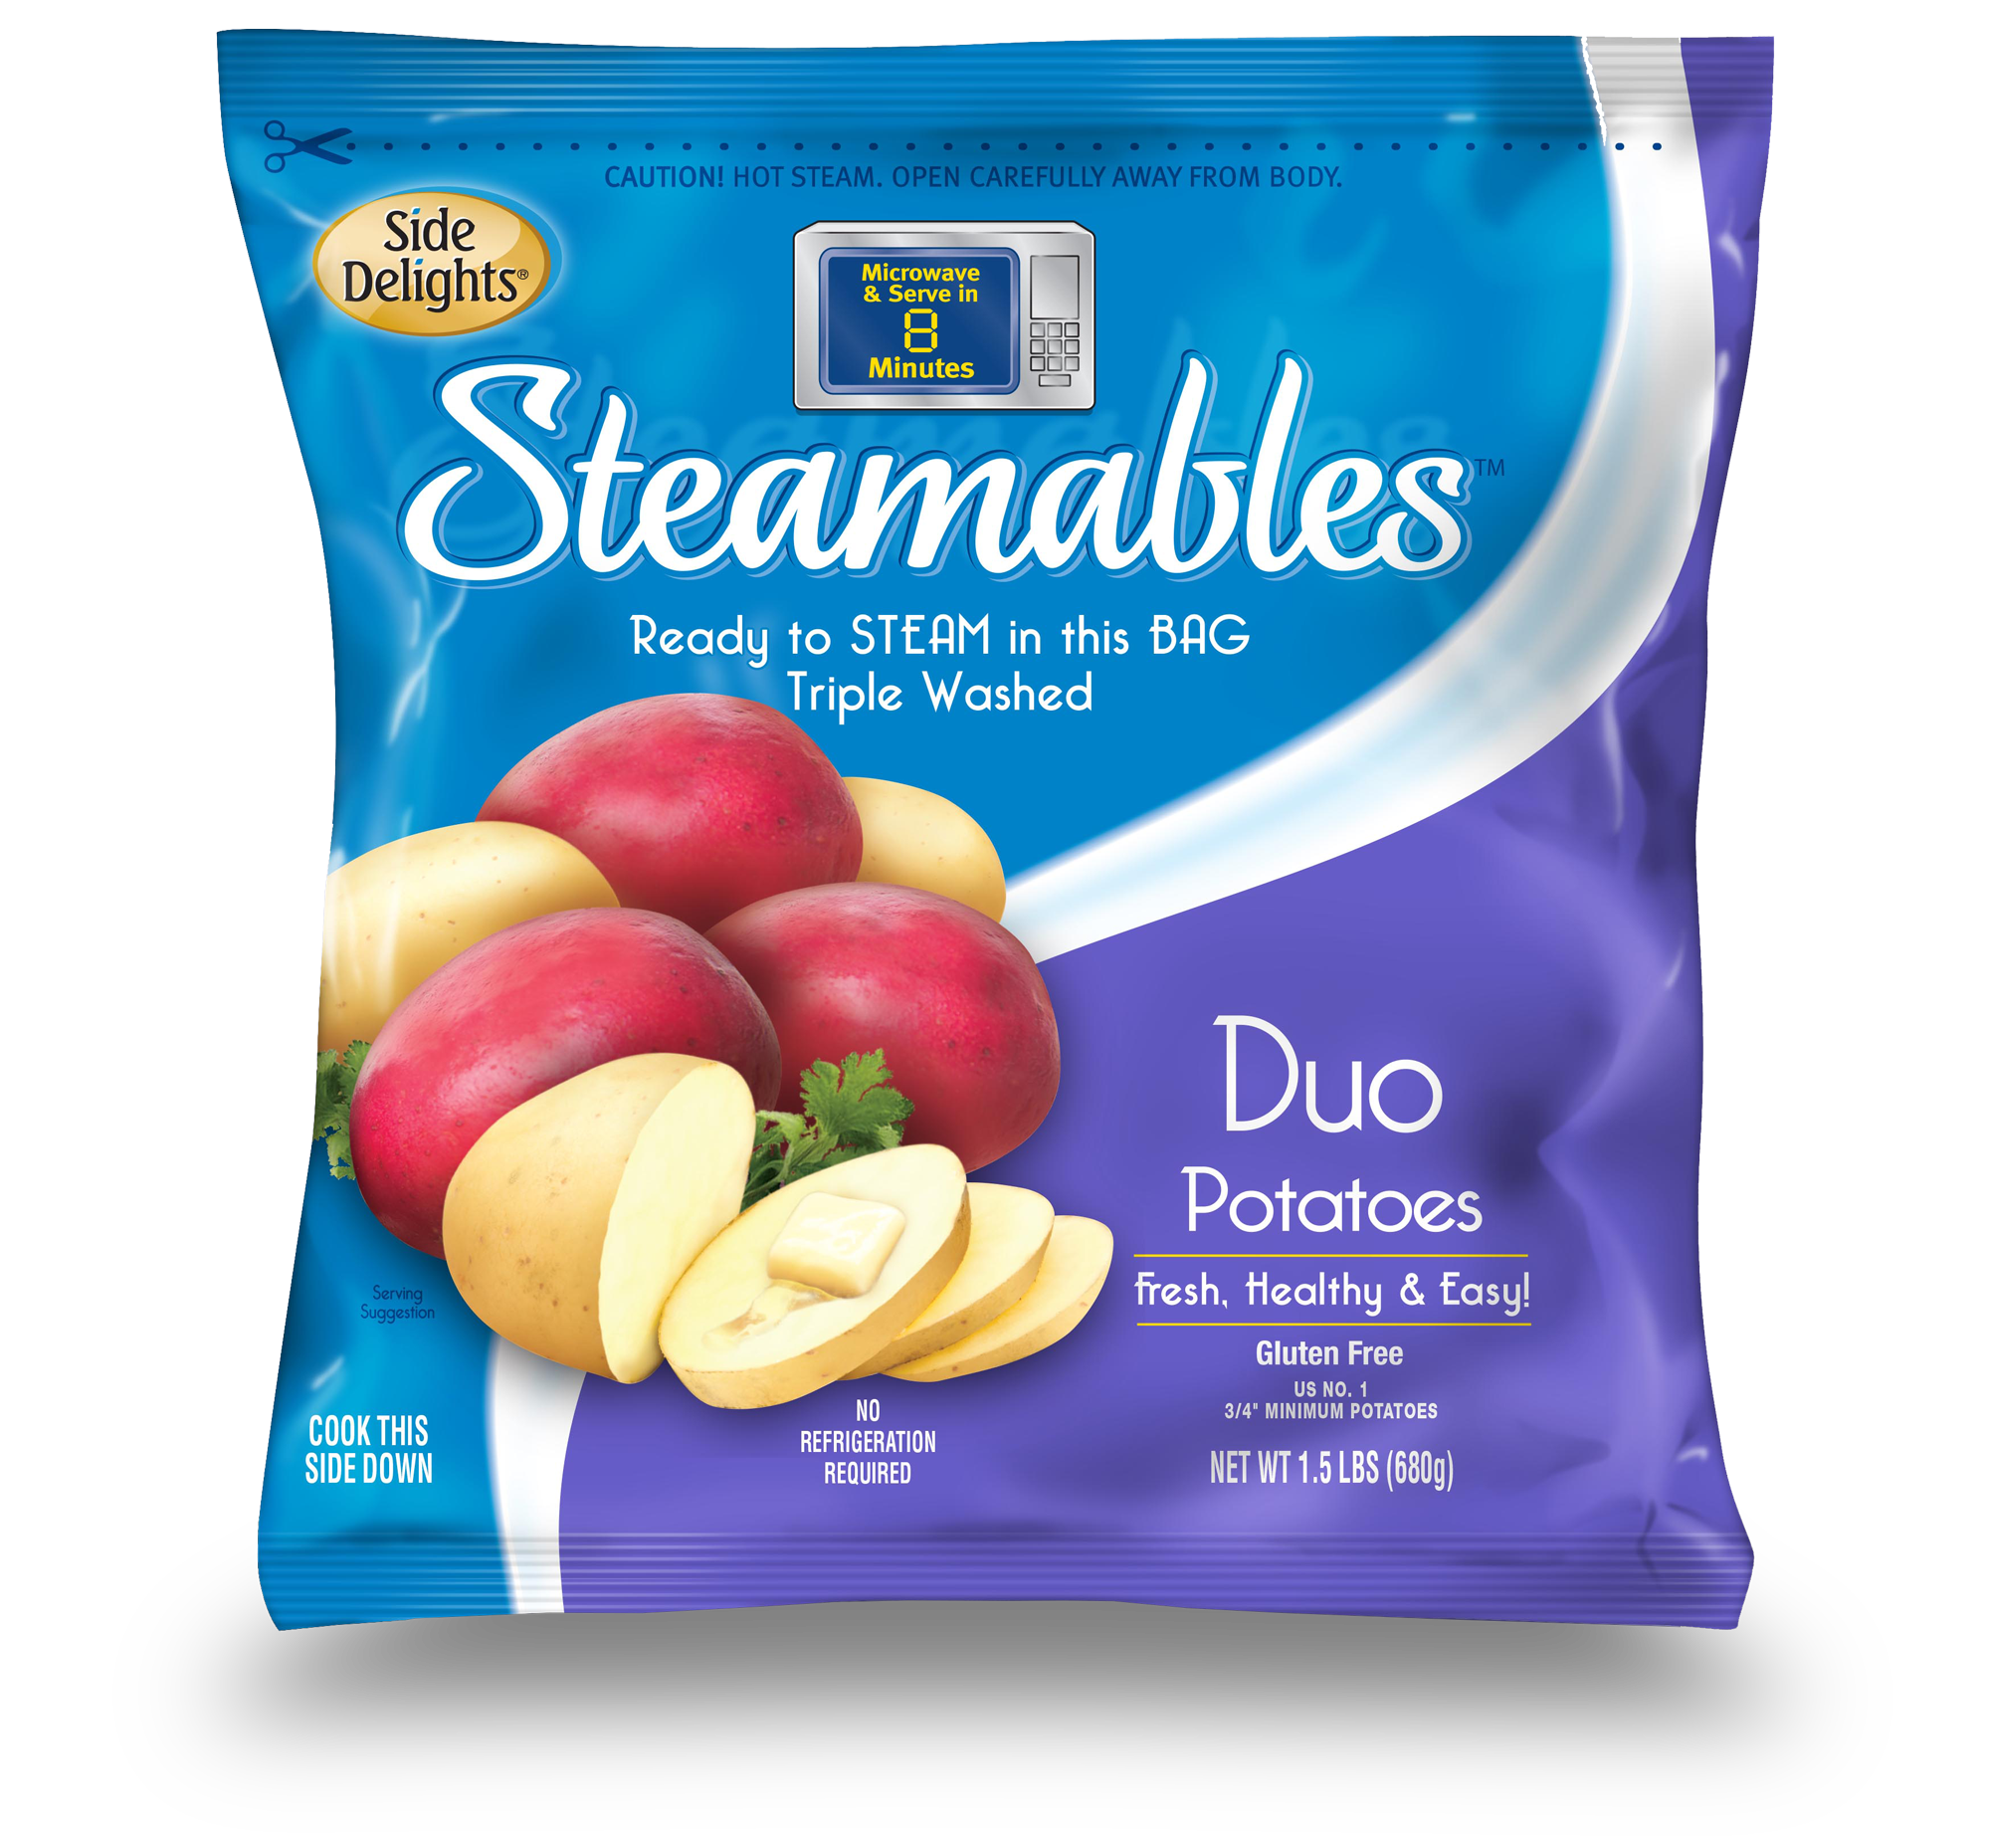 Side Delights® announces Steamables™ fifht year as #1 selling brand of microwave/steamable potato